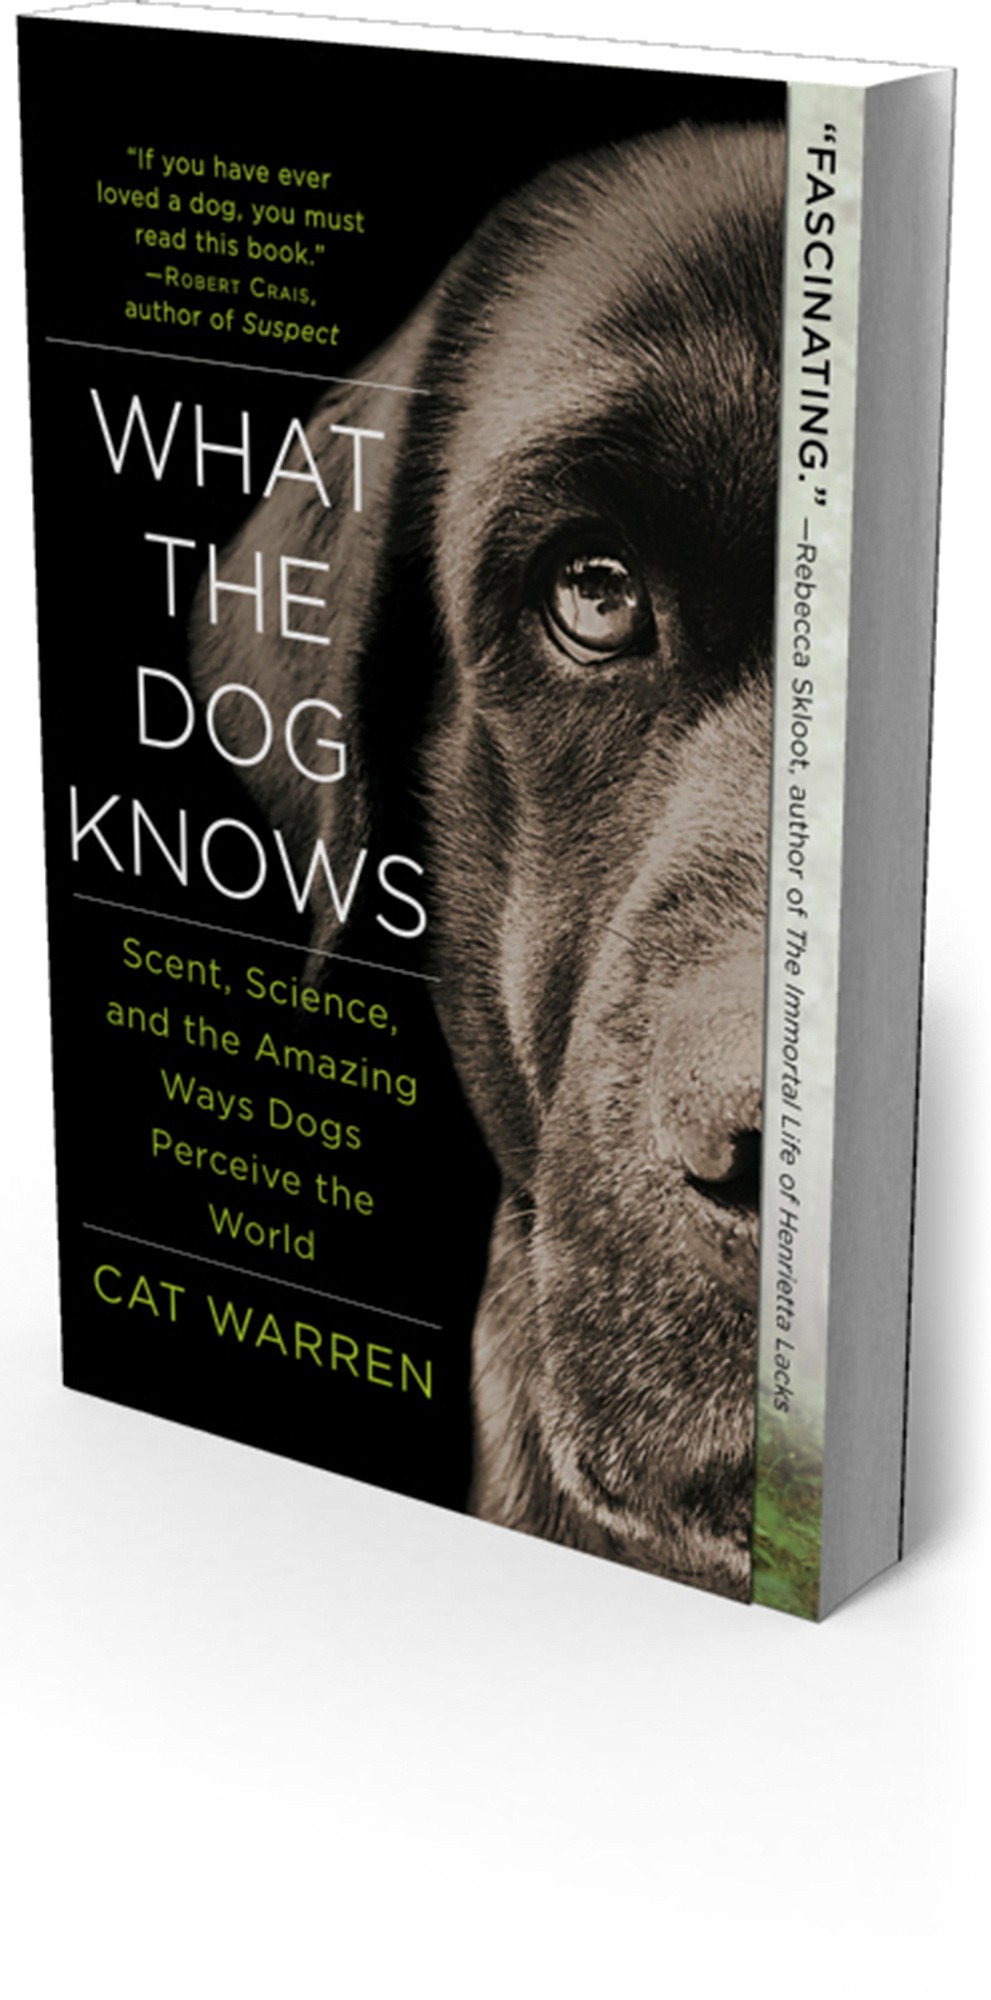 Author Cat Warren will discuss her book &quot;What the Dog Knows: Scent, Science and the Amazing Ways Dogs Perceive the World&quot; on March 14 at Vintage Books.